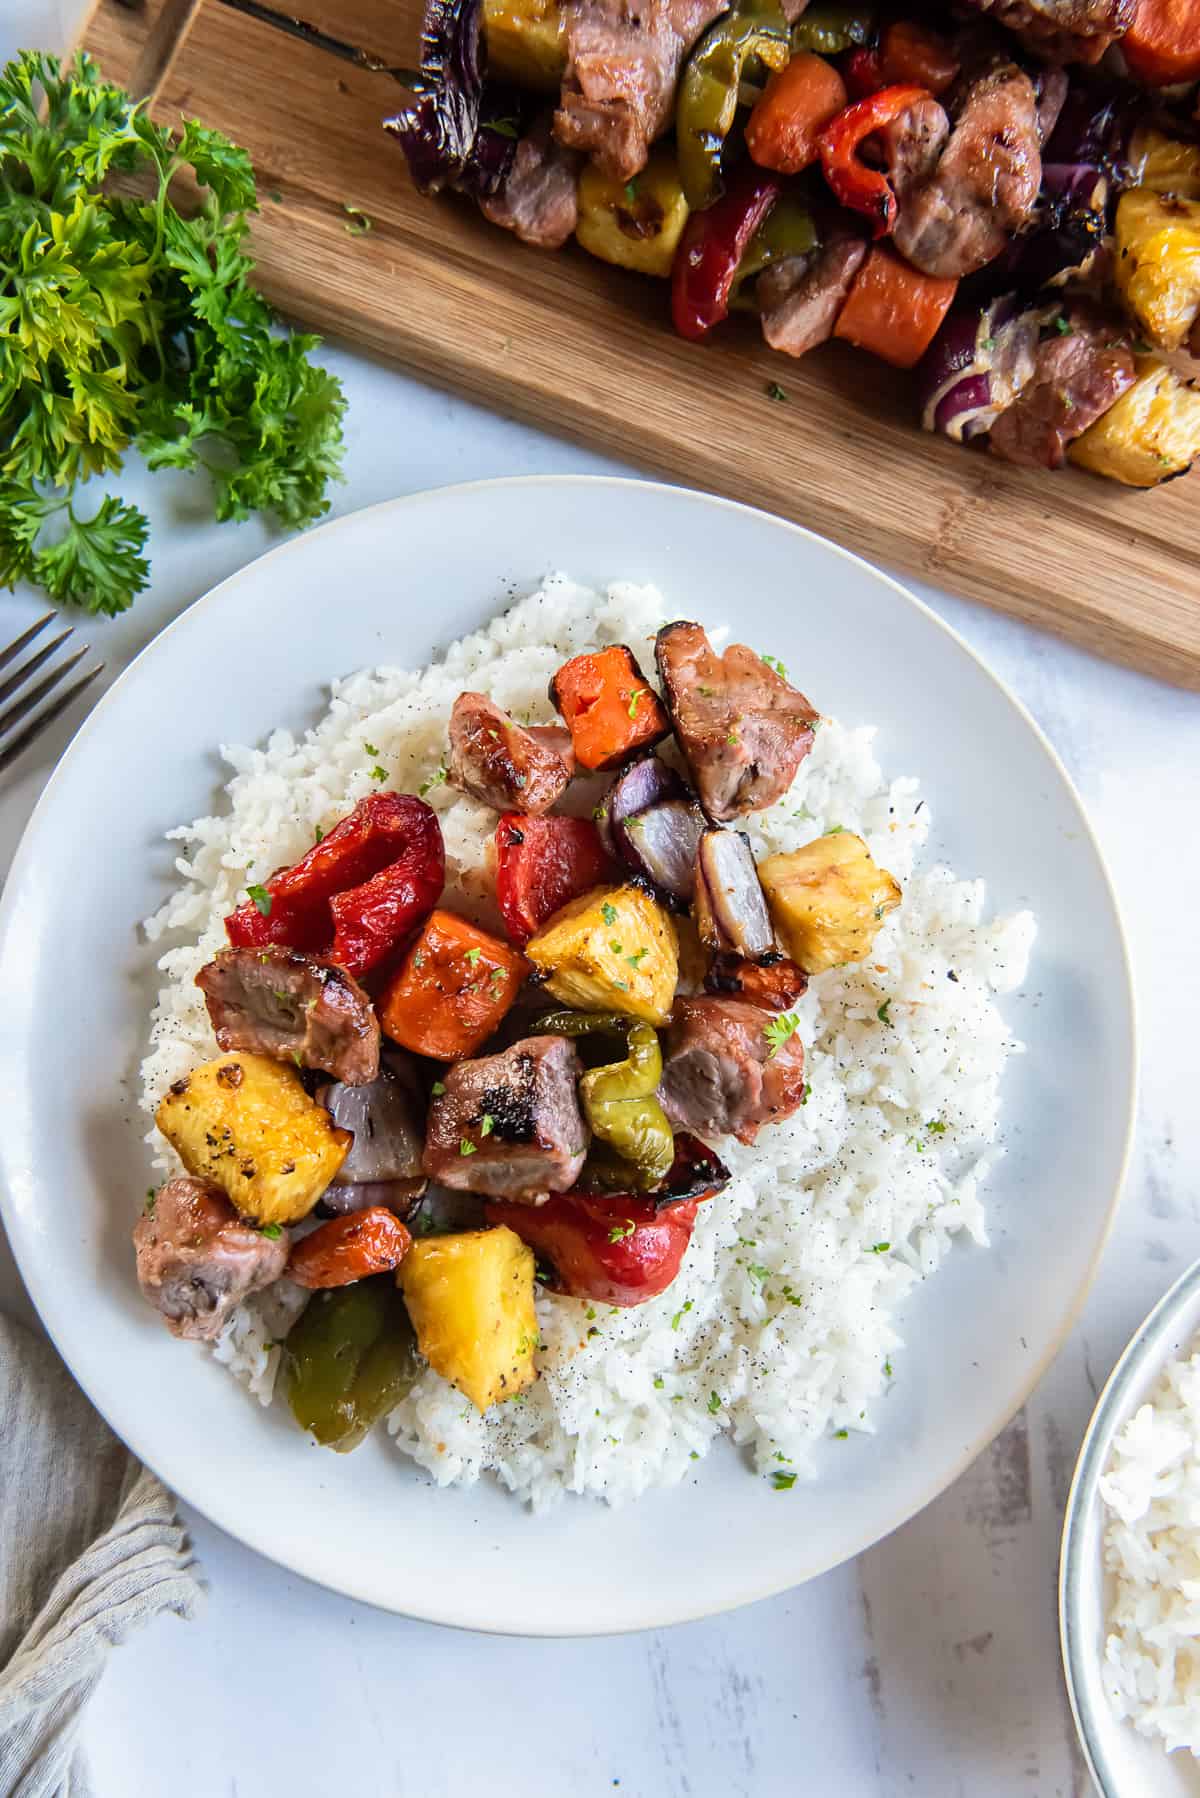 Pork, pineapple, and vegetables off the skewer and on a bed of white rice on a plate.